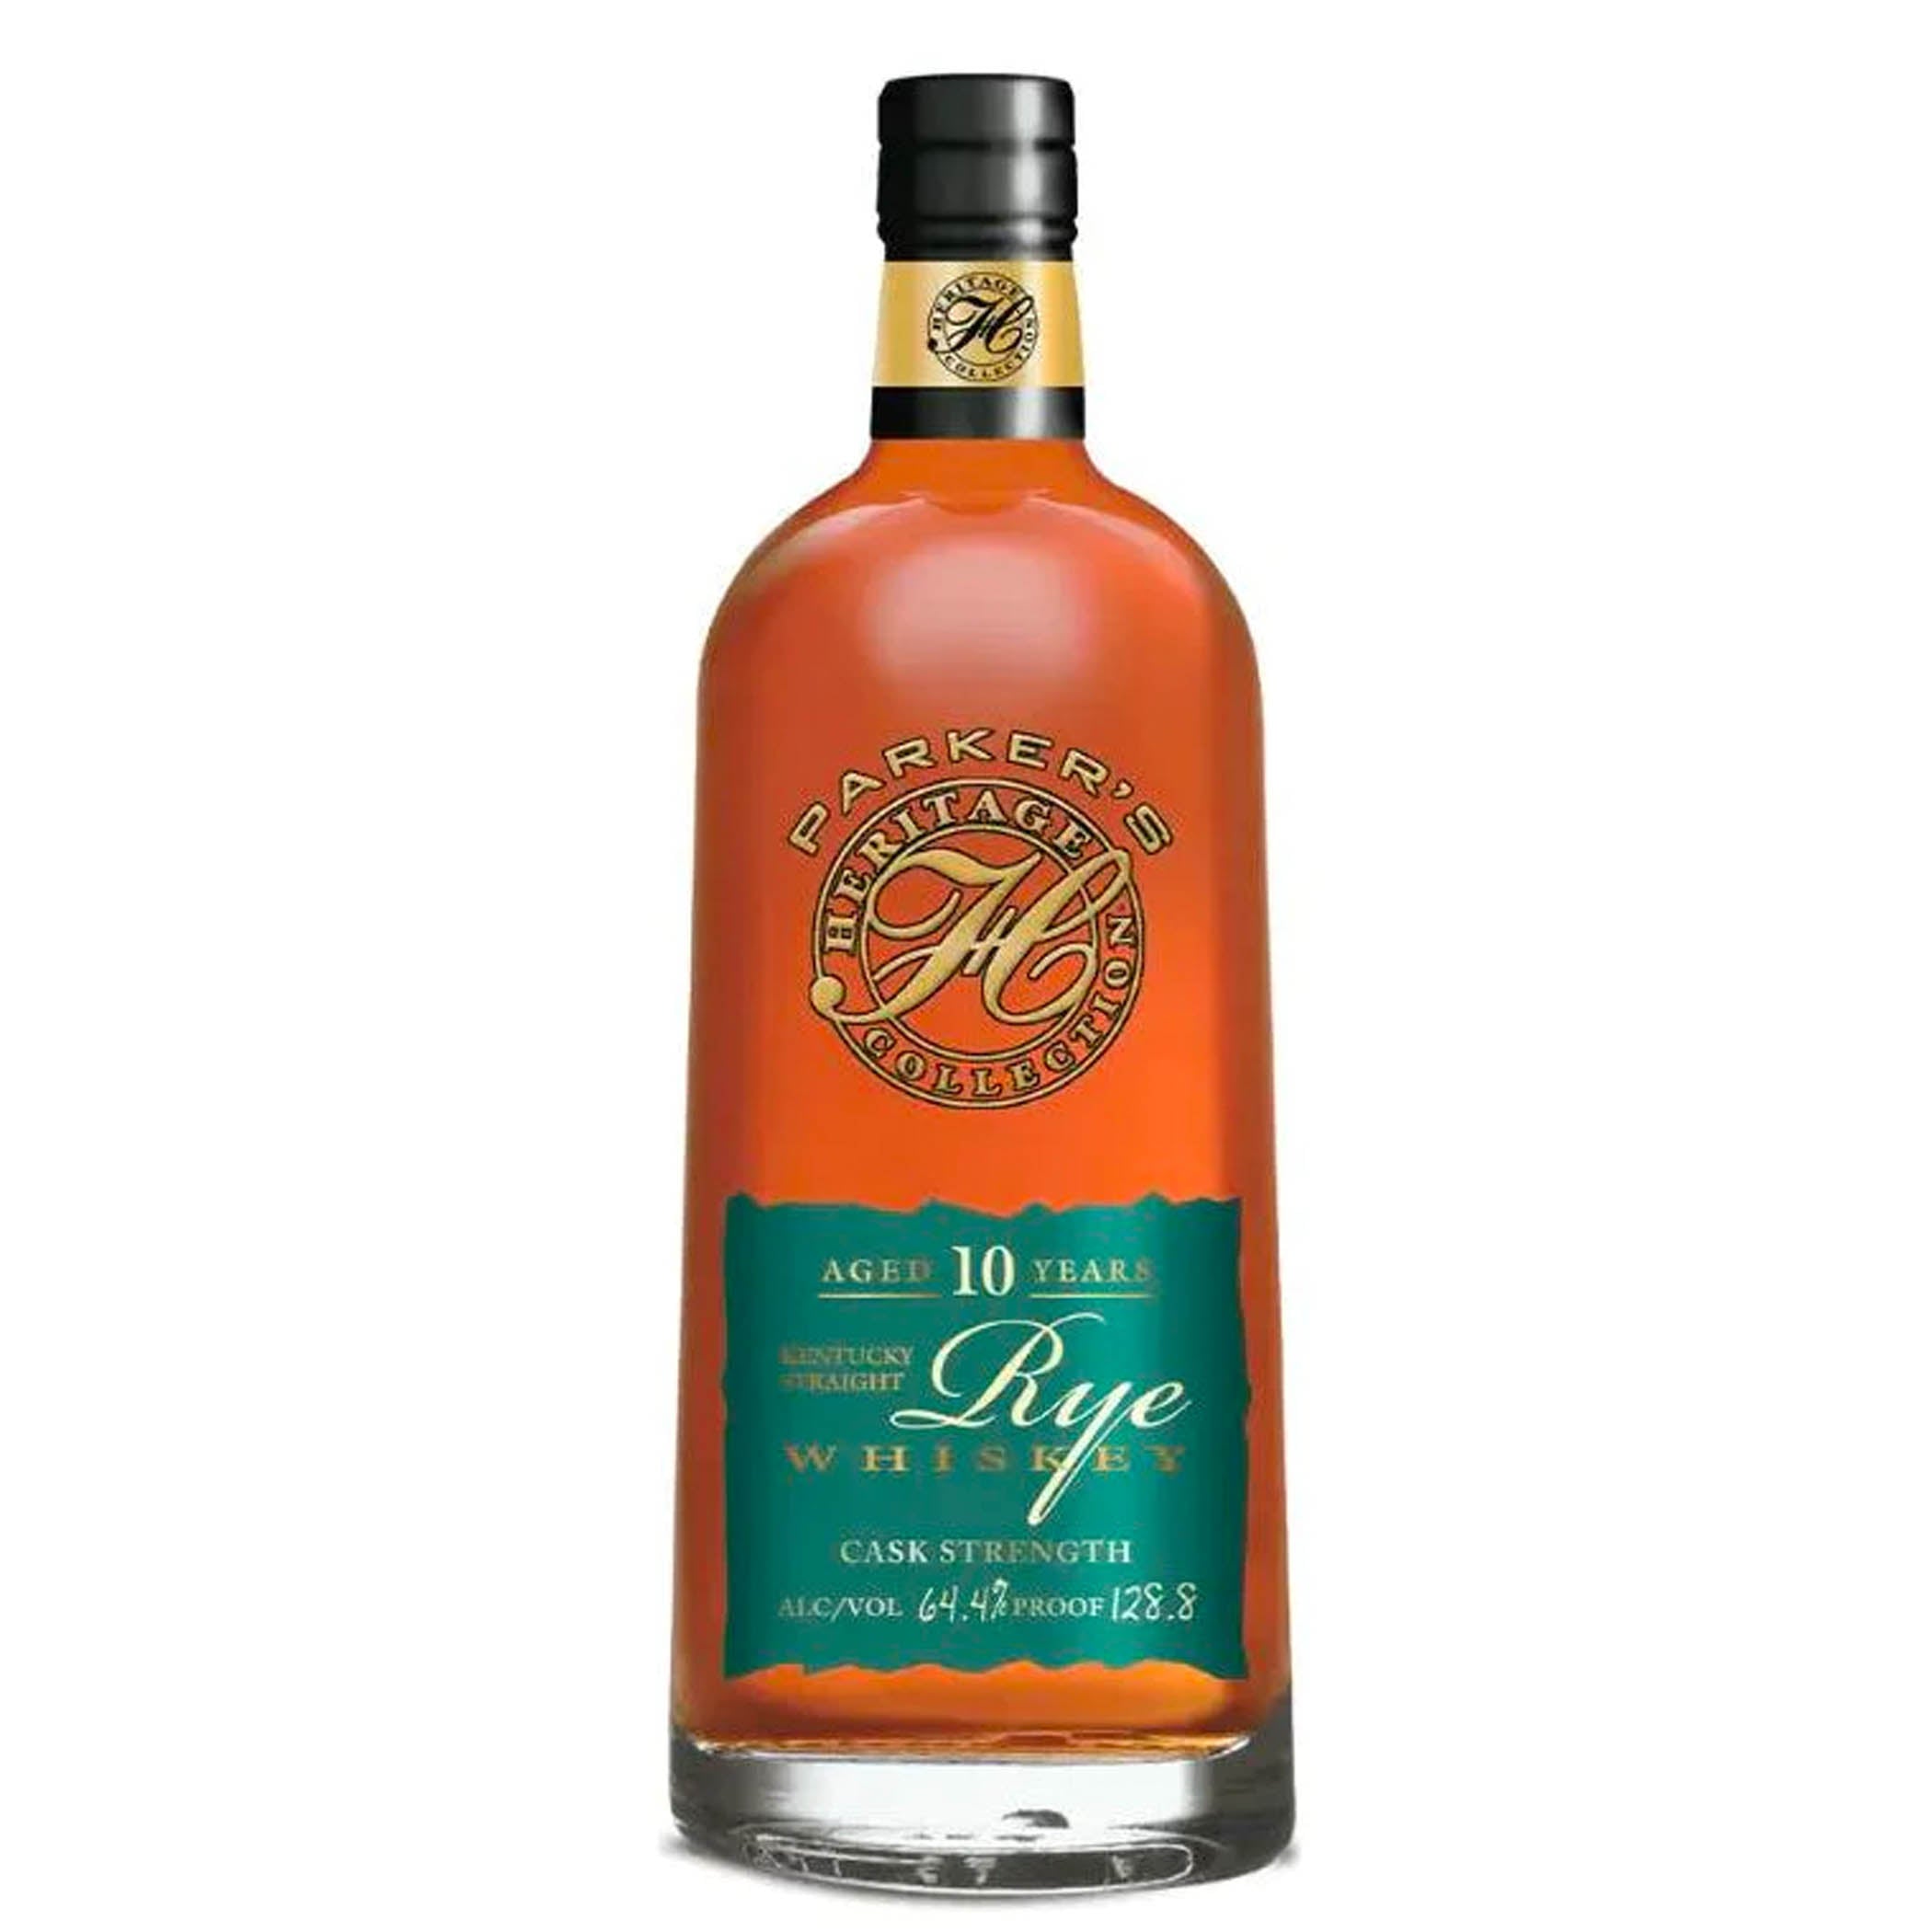 Parker's Heritage Collection 10 Year Old Cask Strength Rye 17th Edition